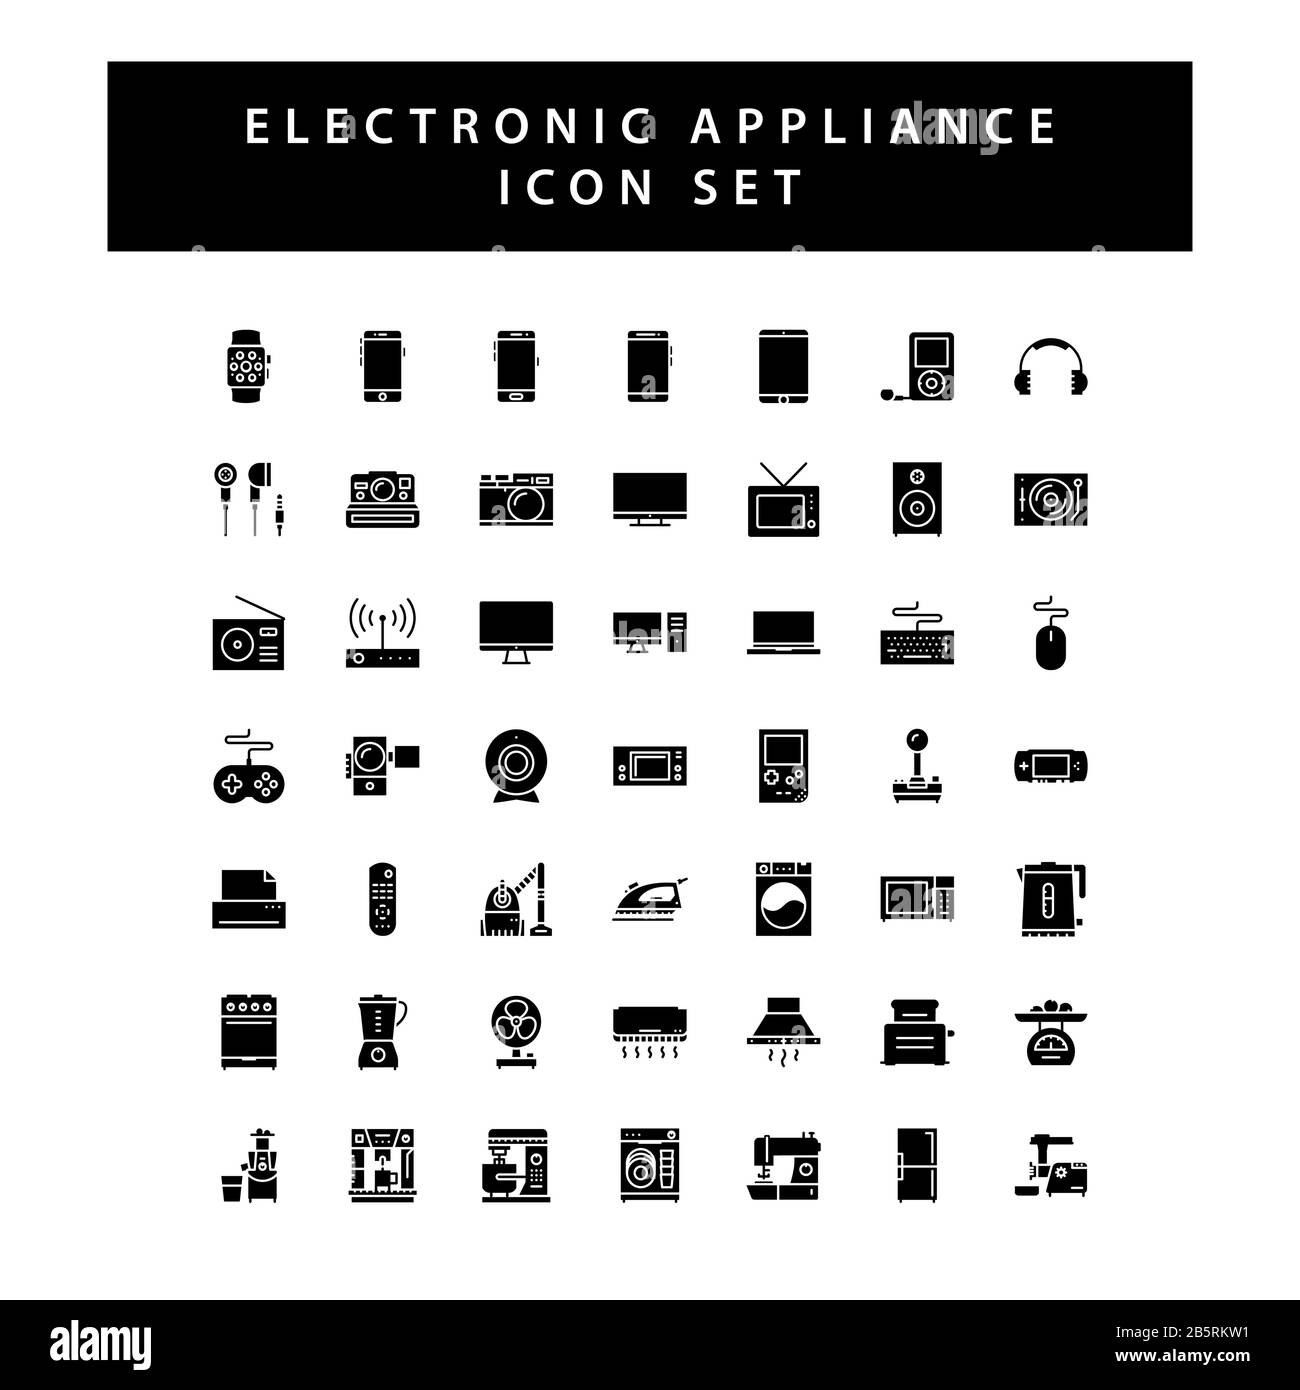 Home appliances electronic icon set with black color glyph style design. Stock Vector